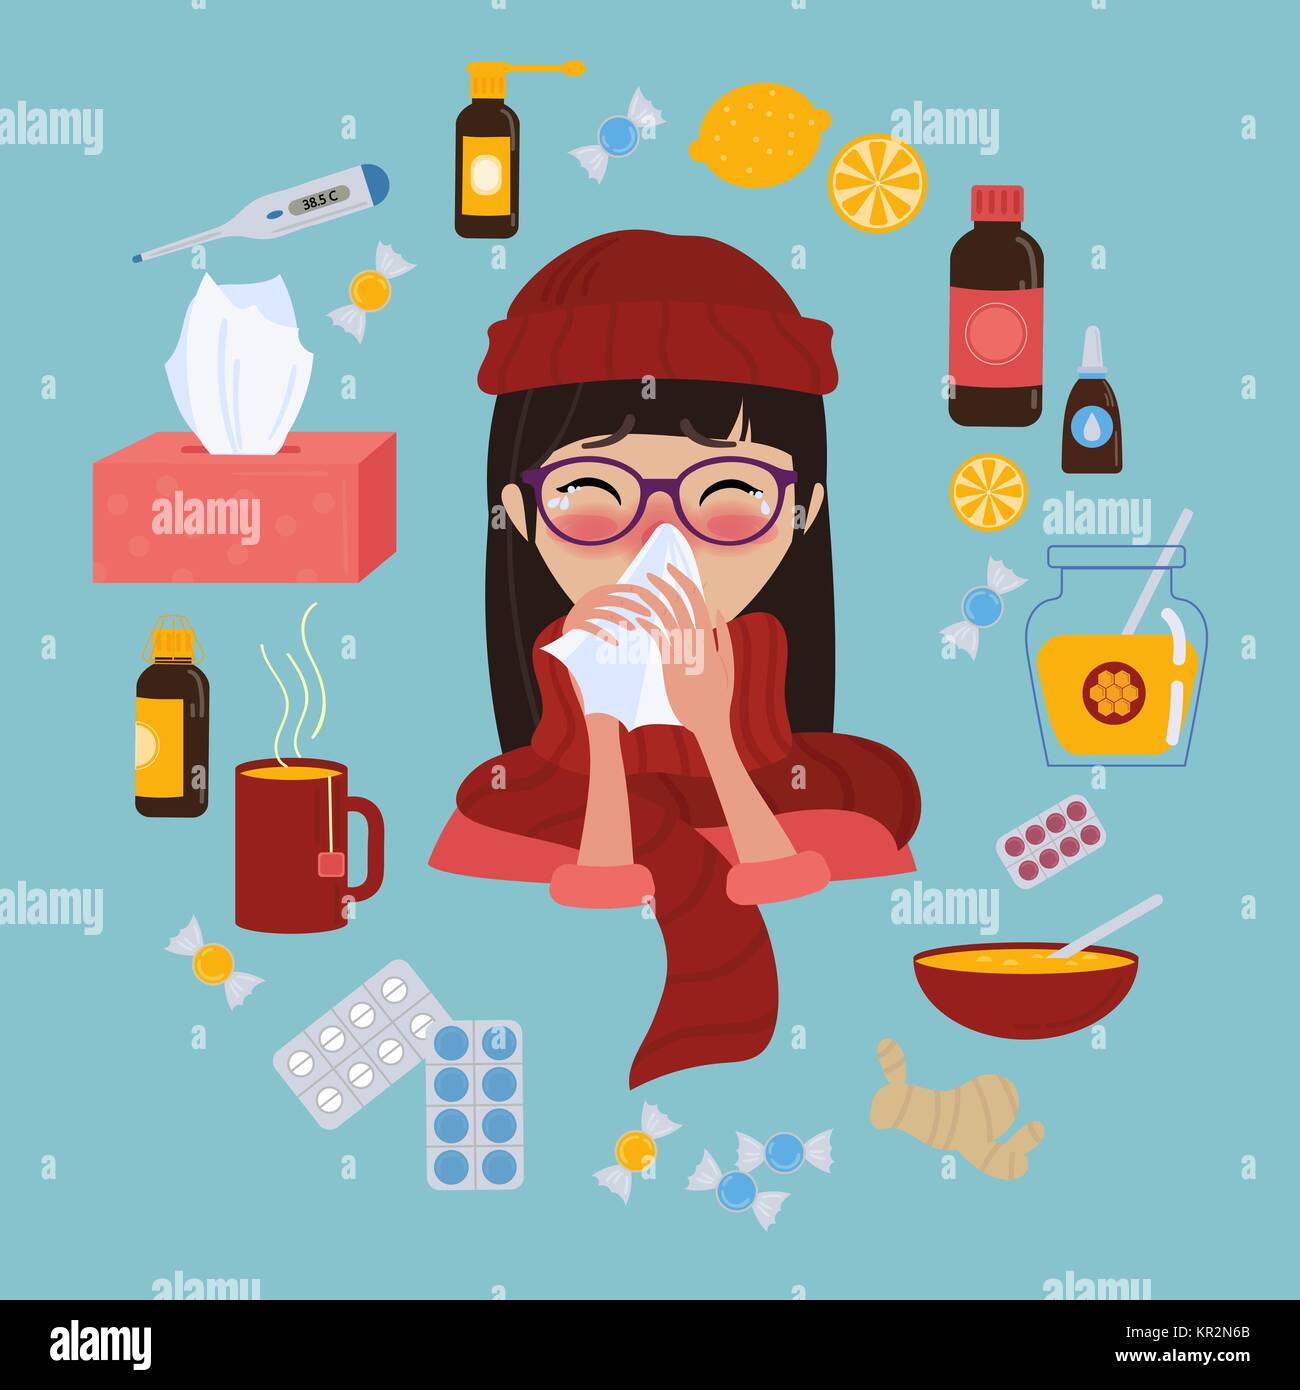 Young girl in glasses and red hat caught cold flu or virus. She has red nose, high temperature and holds handkerchief. Ways to treat illness in a circ Stock Vector